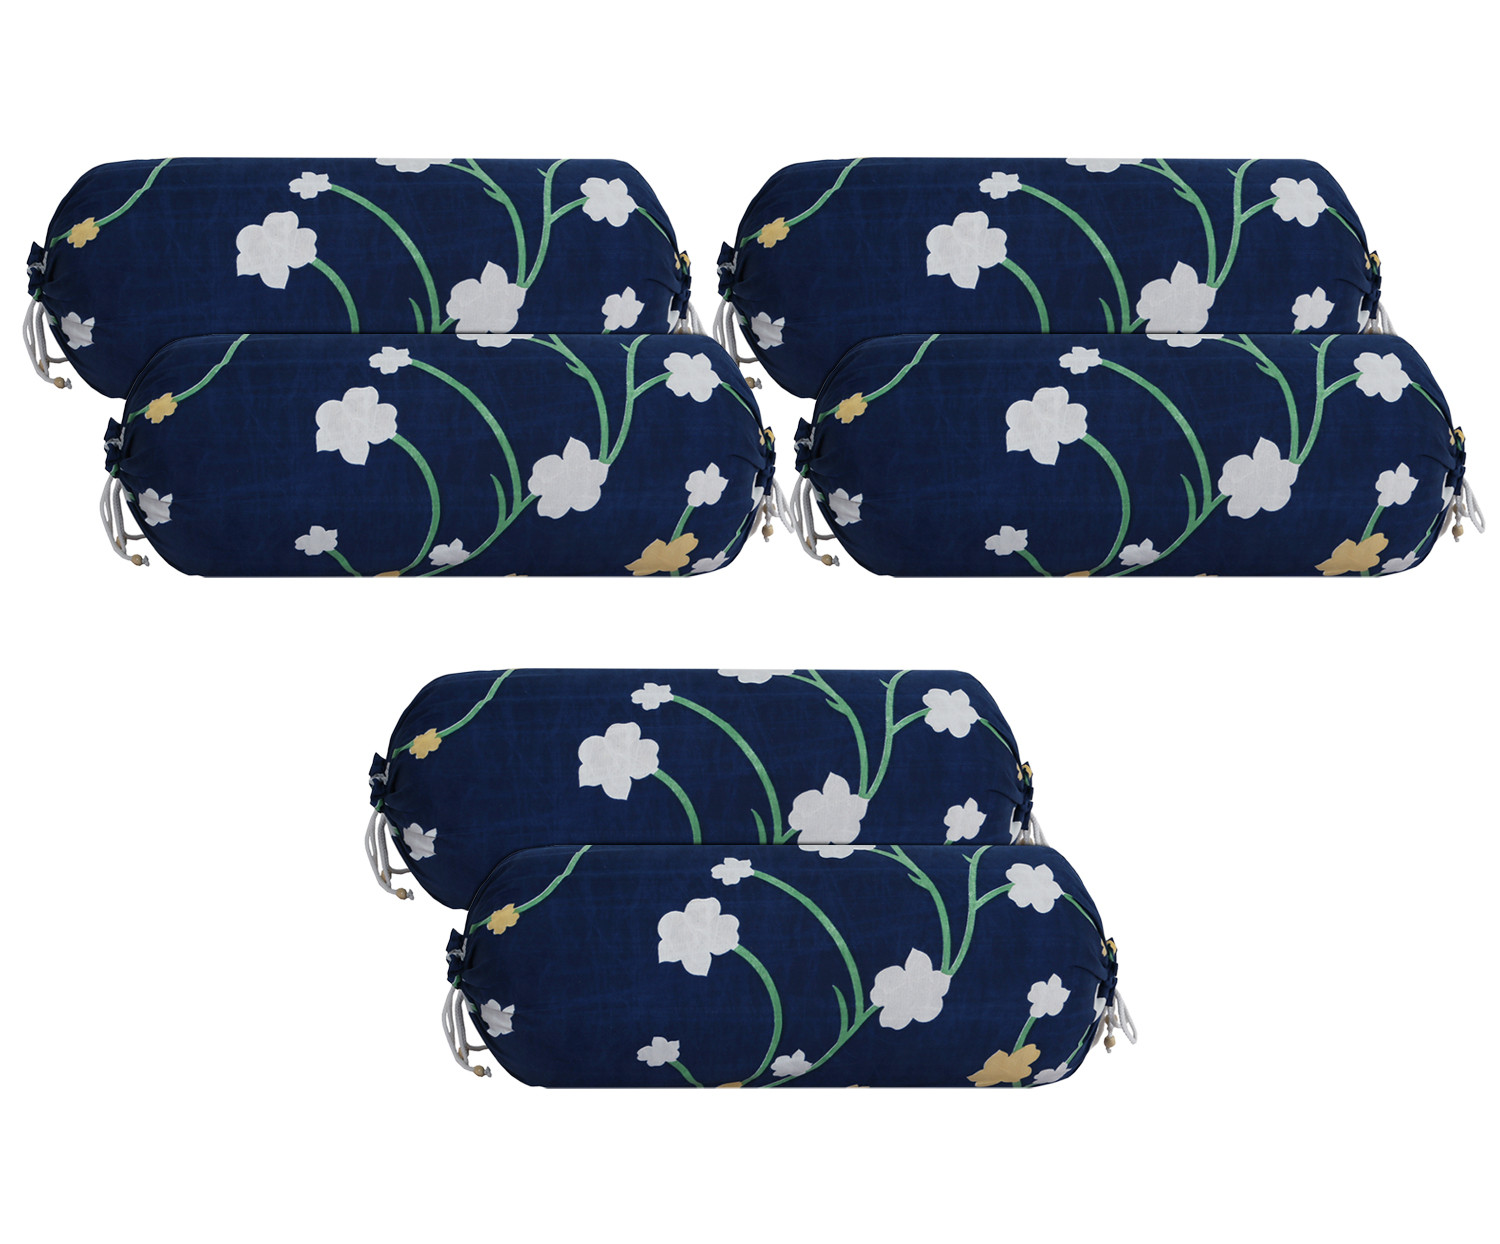 Kuber Industries Bolster Cover|Soft Cotton Bolster Cover Set|Diwan Round Bolster Pillow Covers|Luxurious Flower Print Roll Masand Cover|16x32 Inch (Blue)